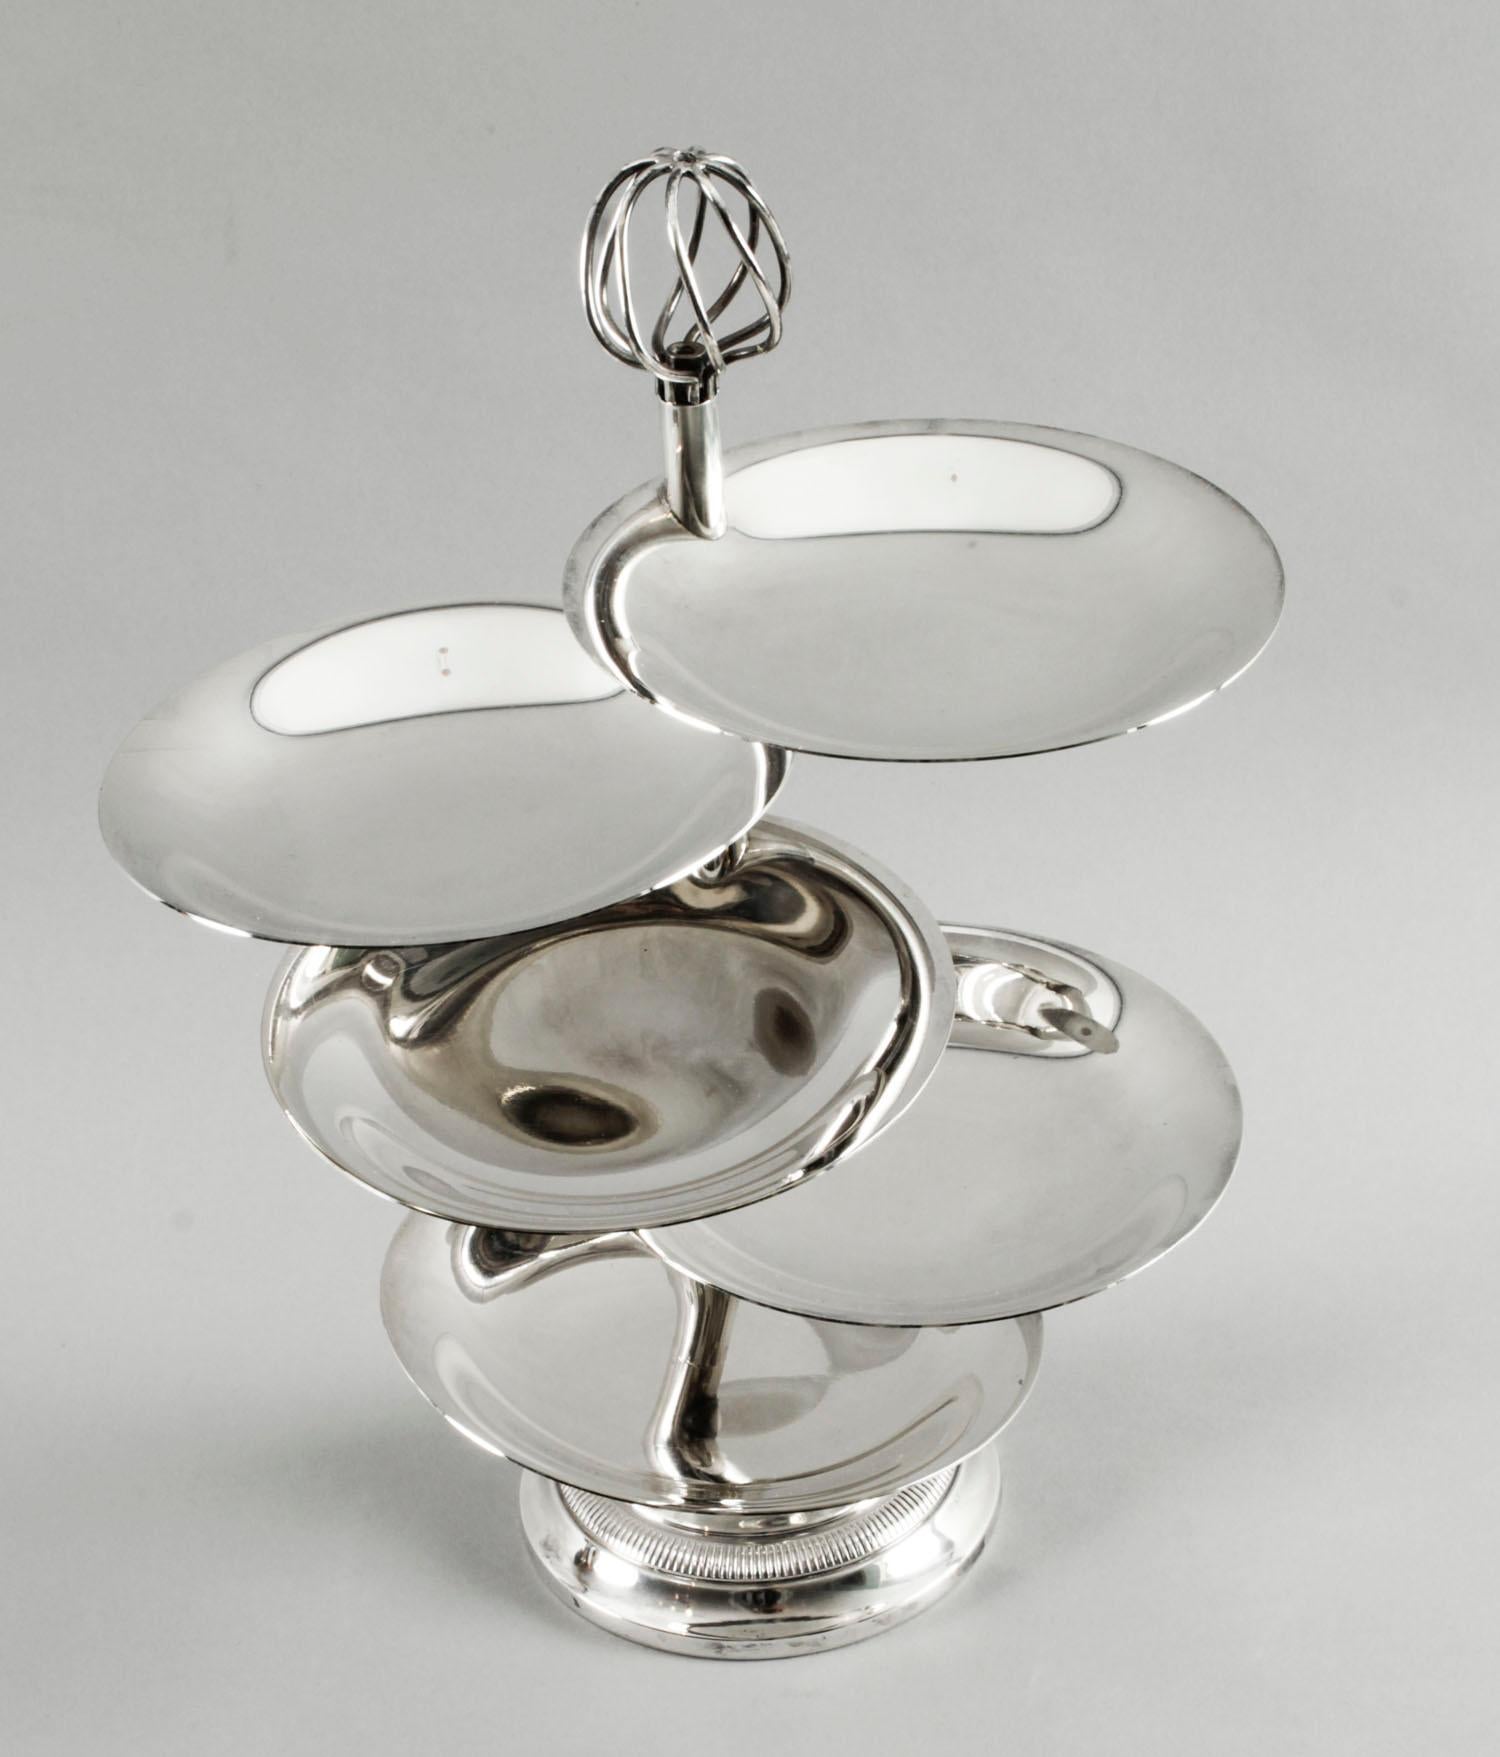 French Antique Silver Plated Hors d'oeuvres Stand by Christofle 19th C For Sale